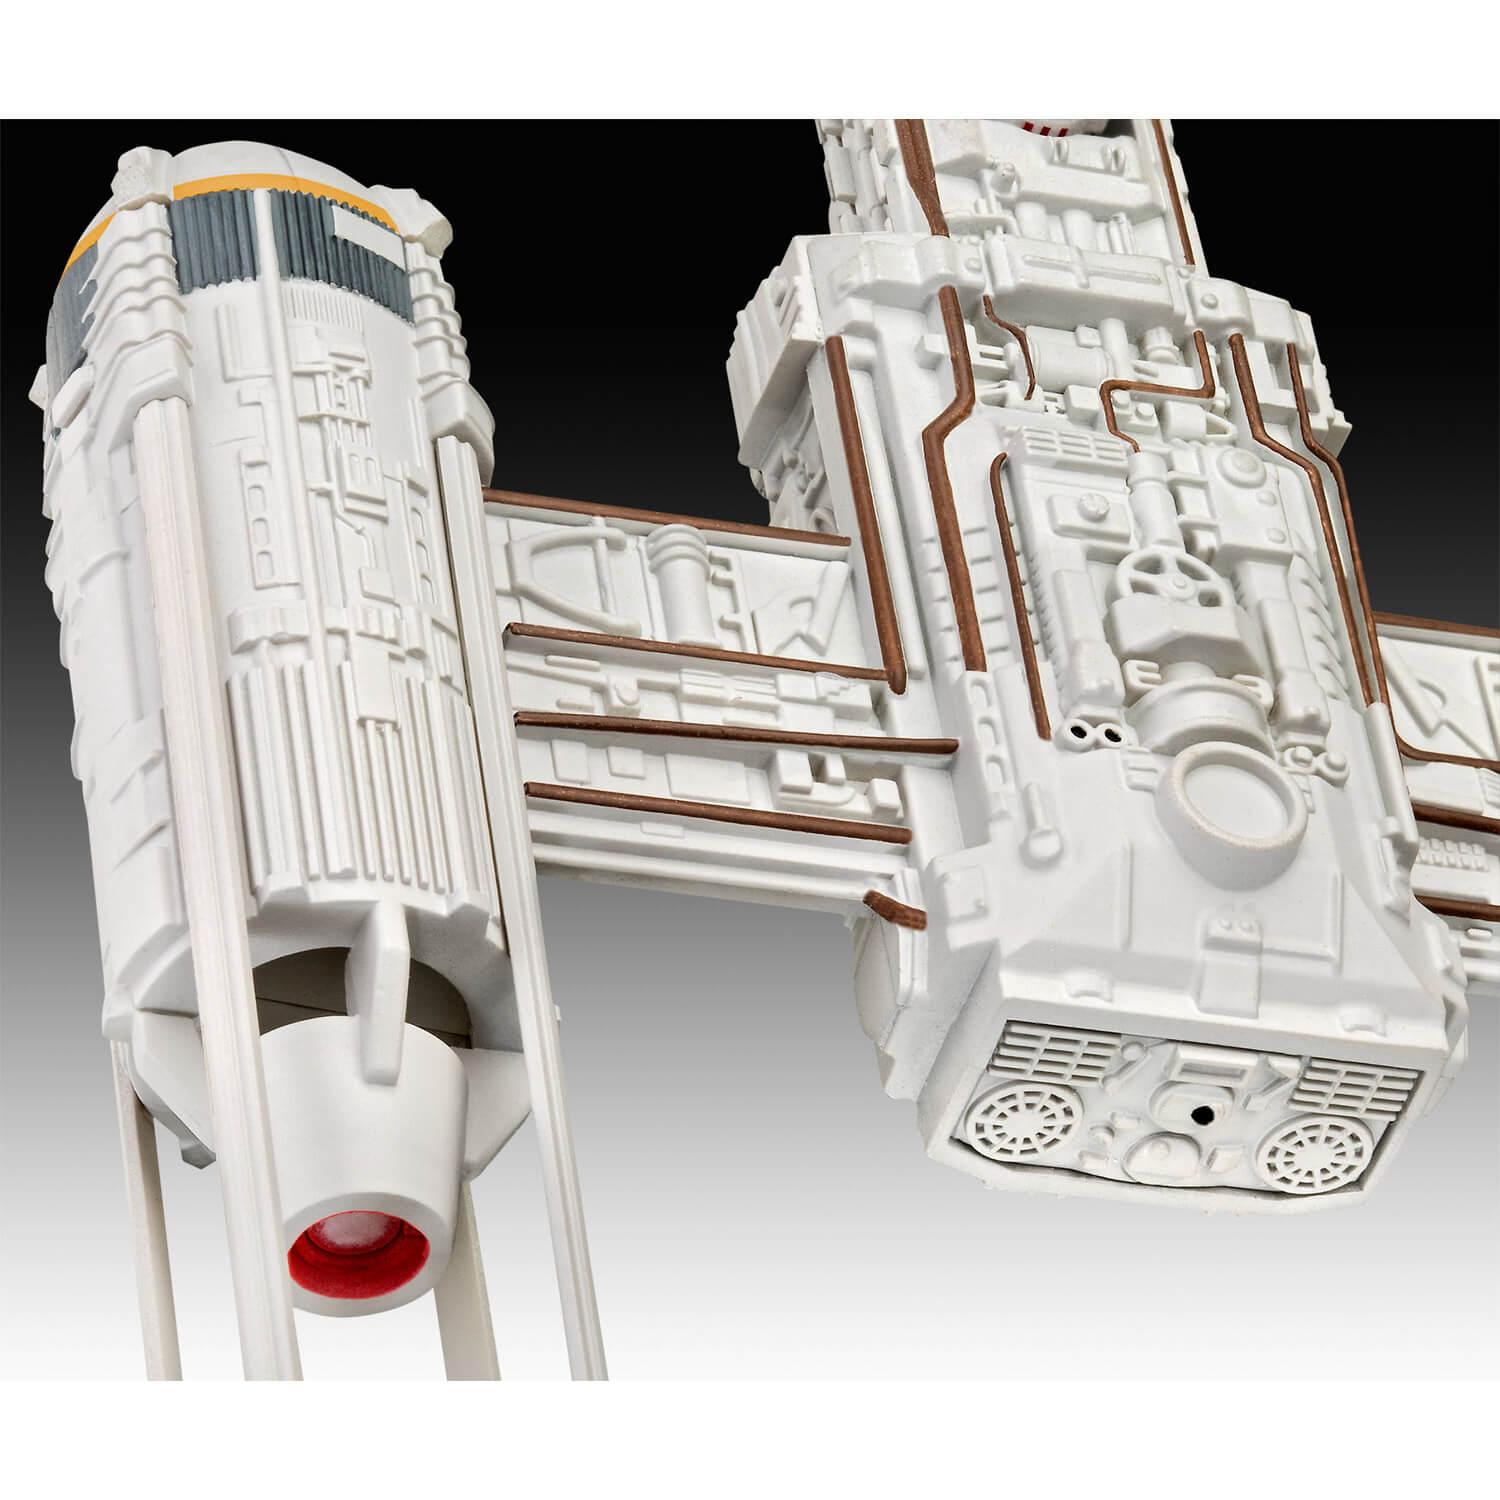 Maquette Star Wars : A-wing Starfighter - Revell - Rue des Maquettes